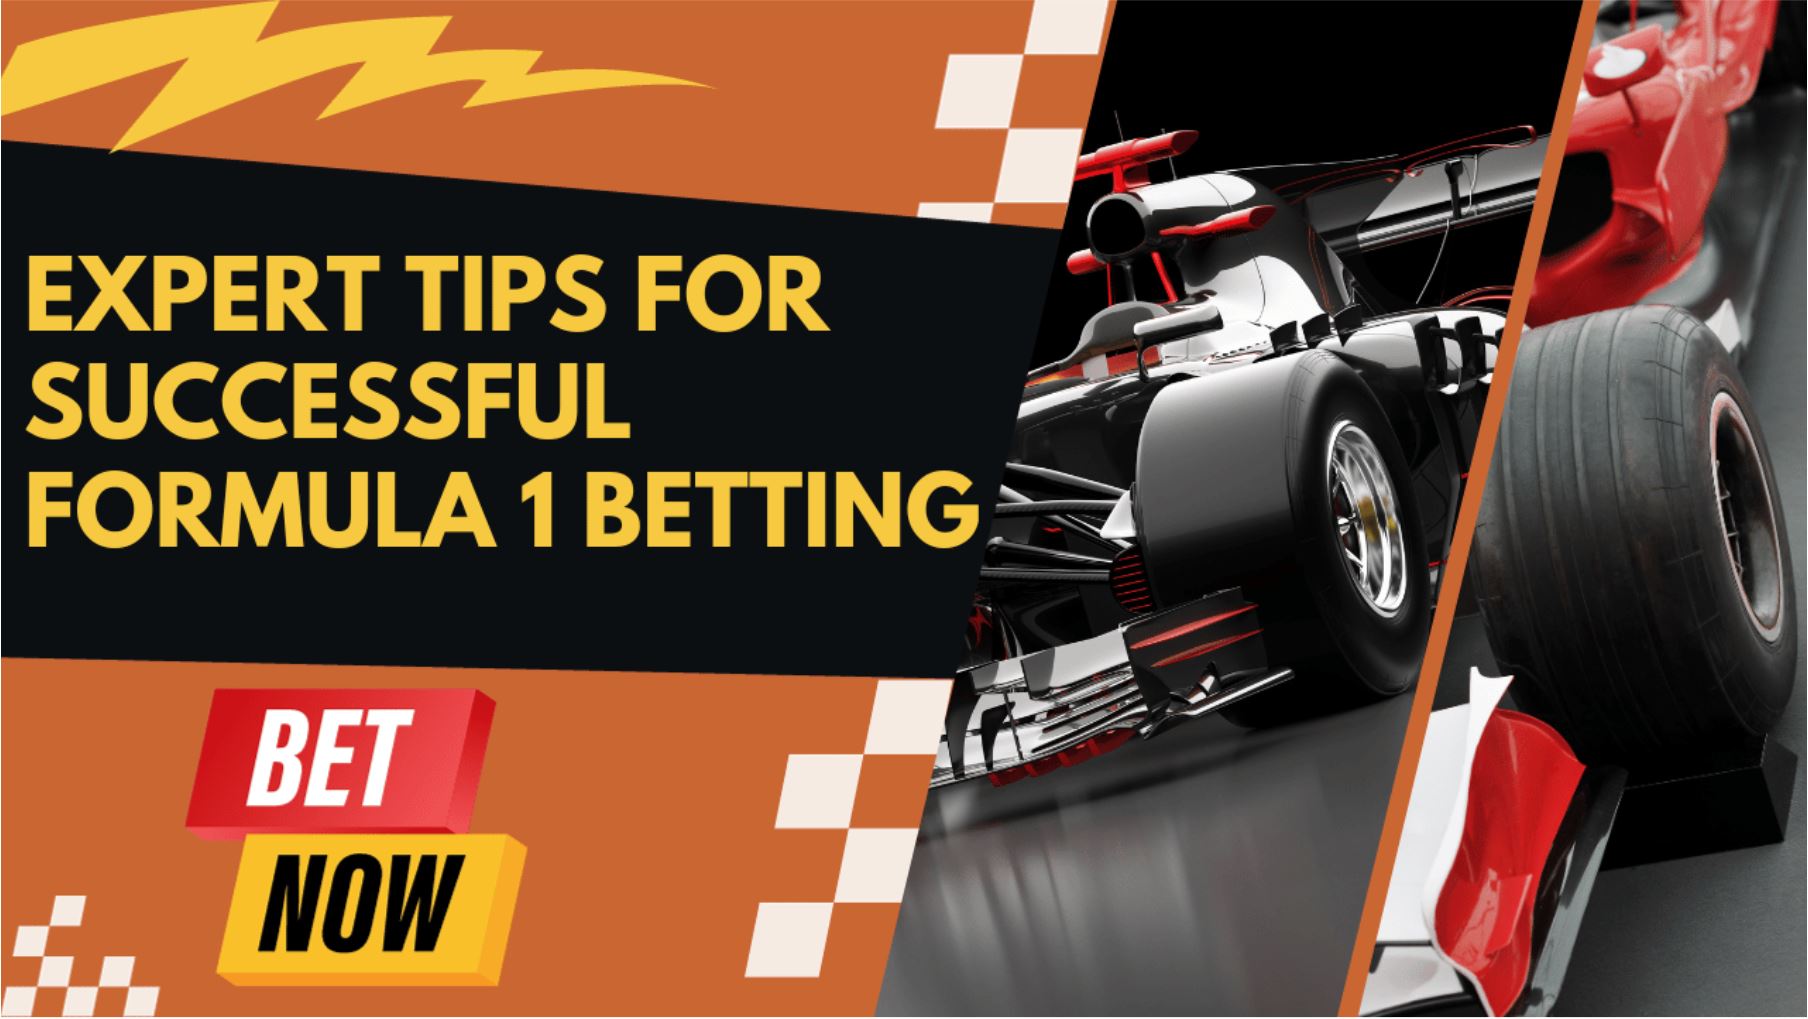 Expert Tips for Successful Formula 1 Betting